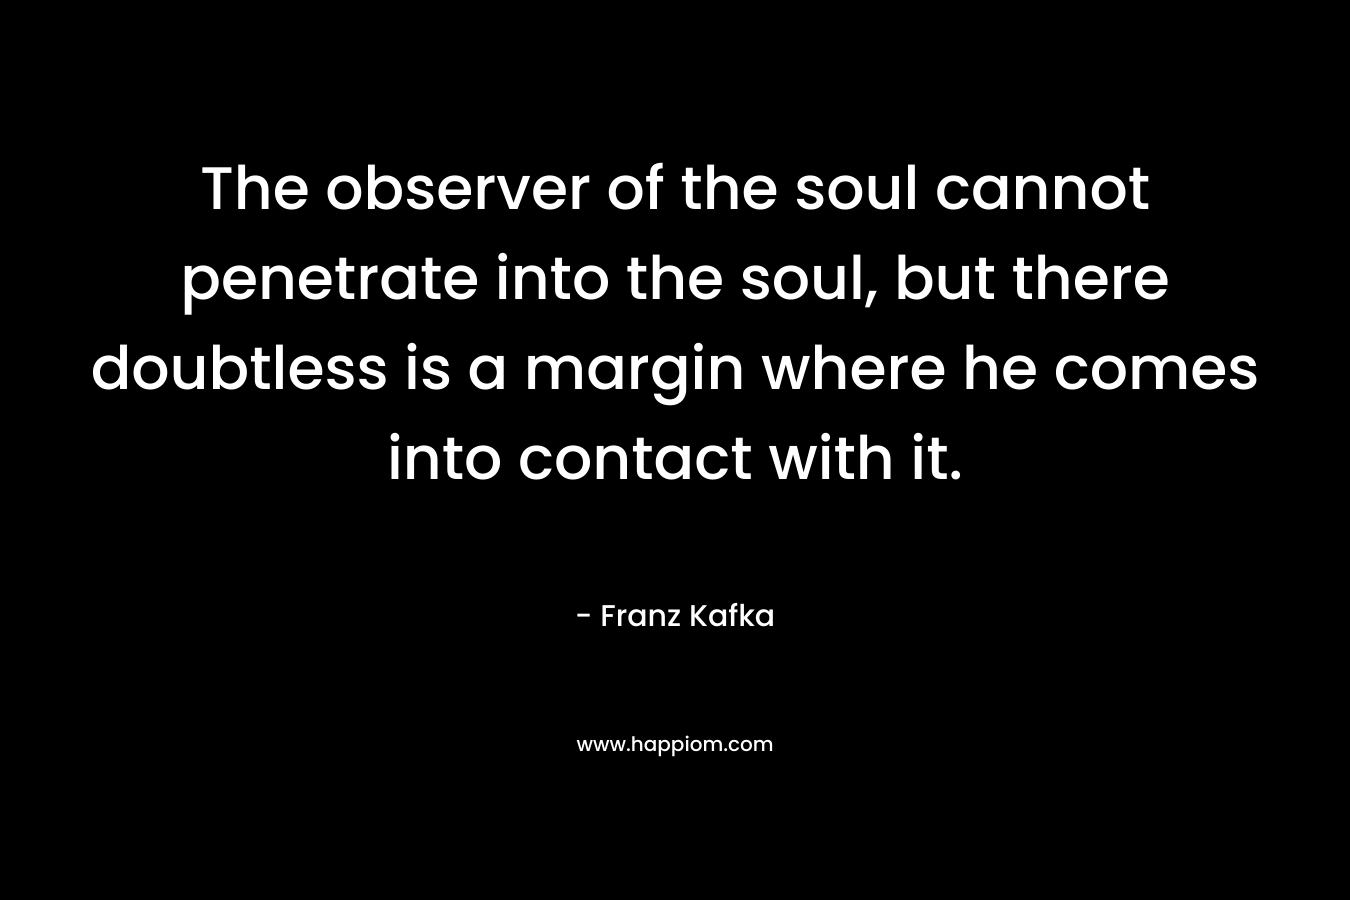 The observer of the soul cannot penetrate into the soul, but there doubtless is a margin where he comes into contact with it.